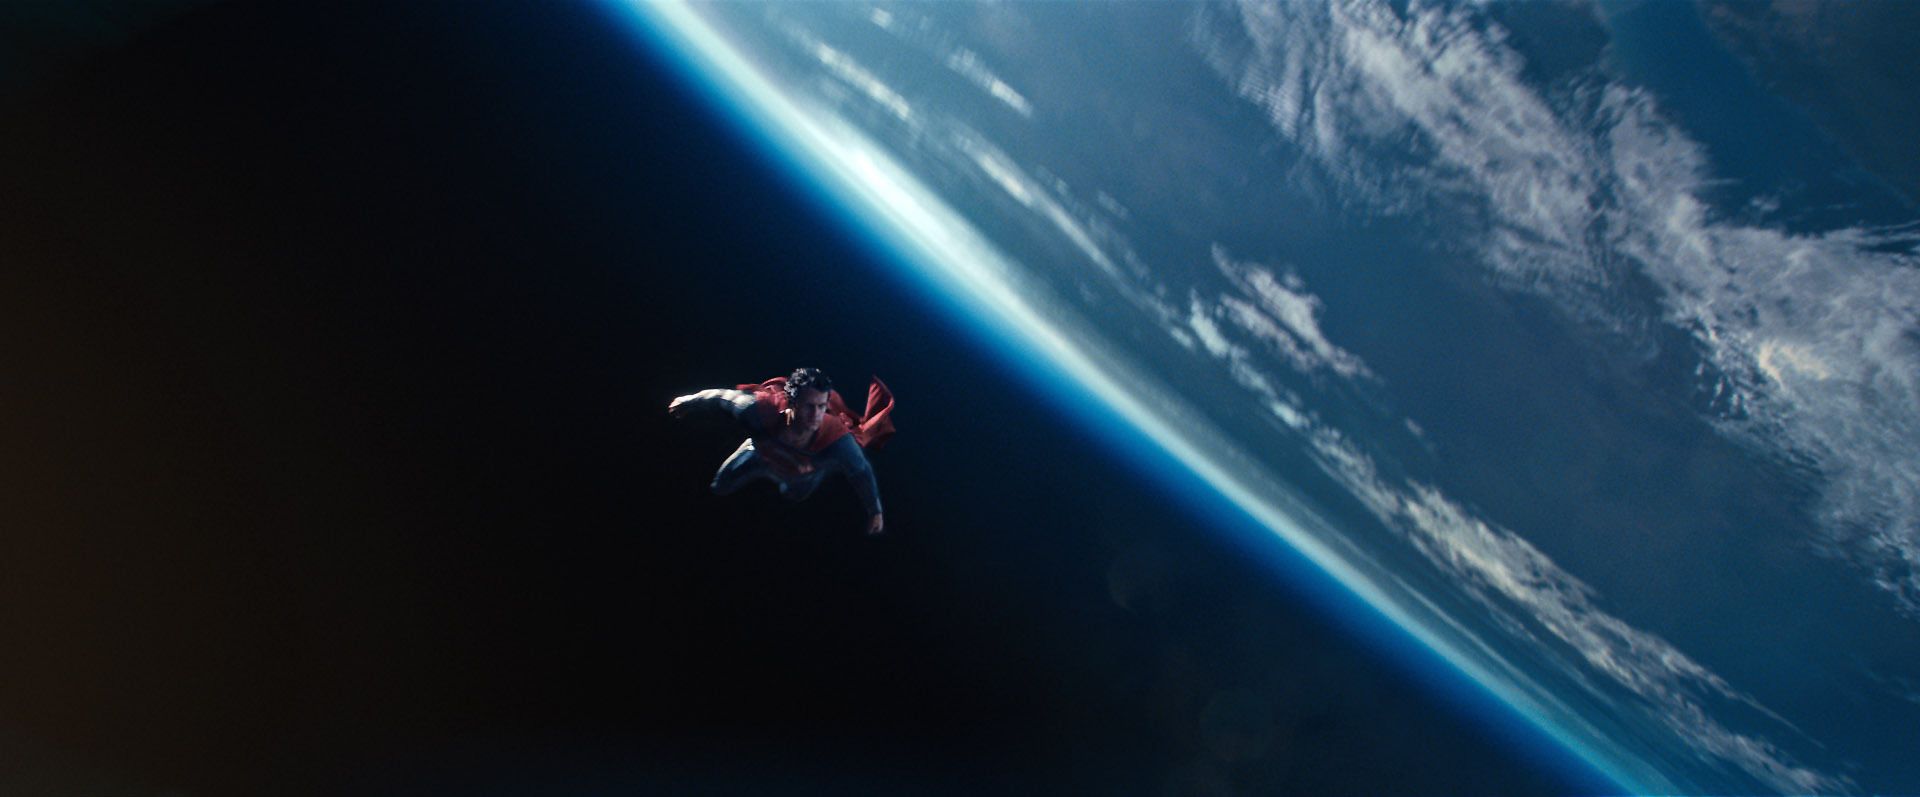 Beautiful Photos From 'Man of Steel